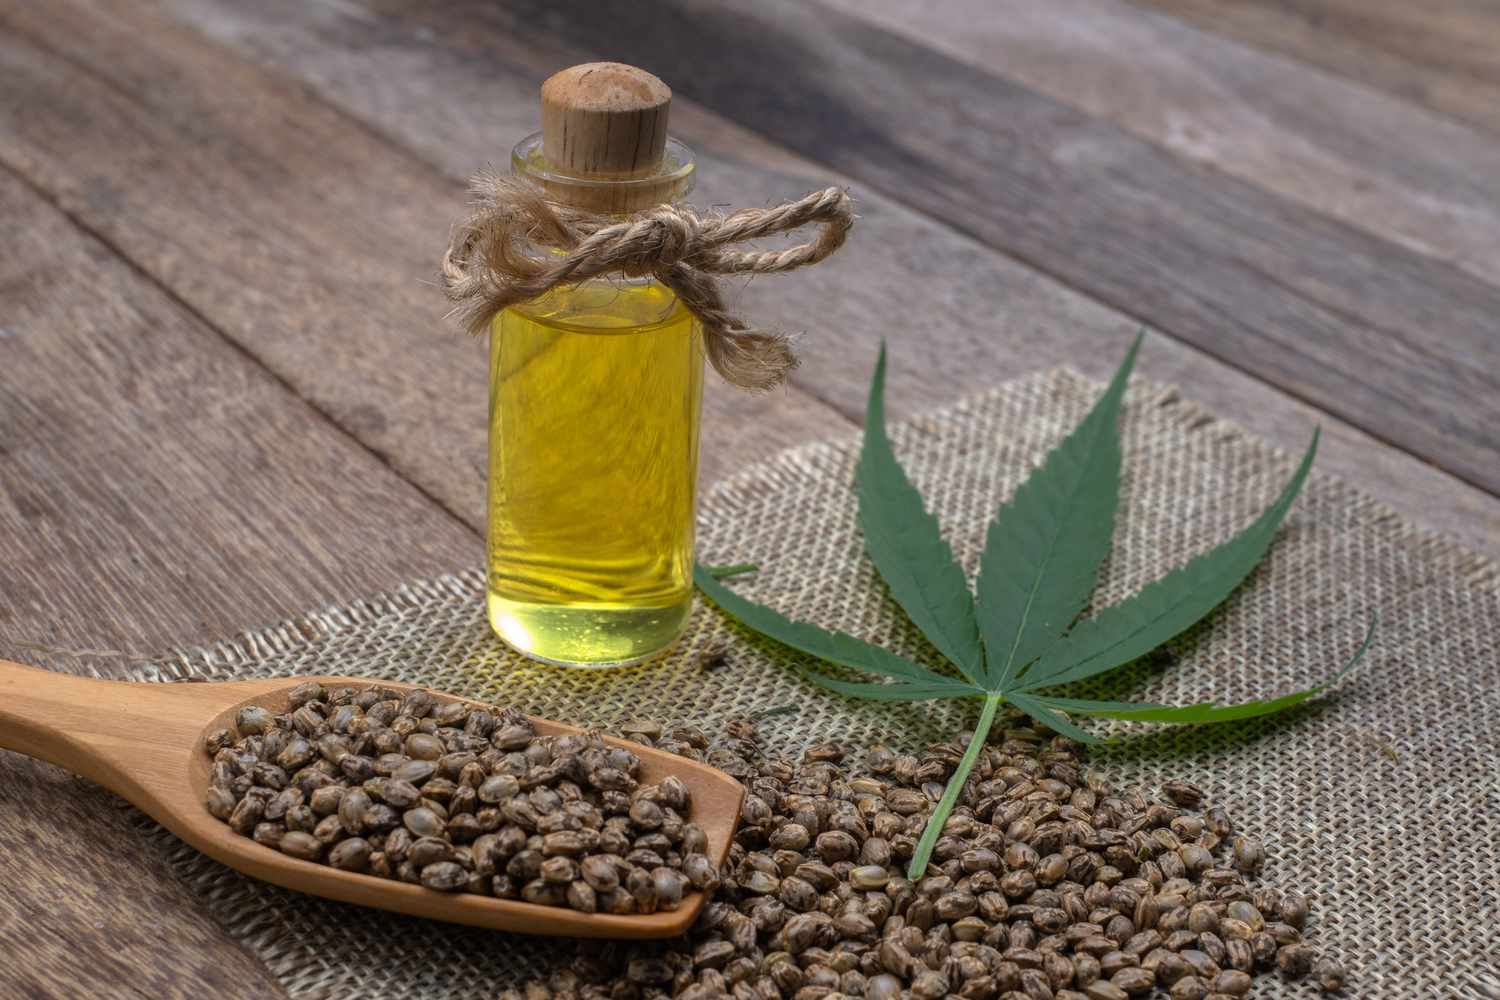 hemp-oil-in-a-glass-bottle-tied-with-a-bow-hemp-seeds-in-a-wooden-spoon-on-the-table--the-concept-of-bringing-hemp-oil-extracted-as-a-medicine-by-natural-methods--doctors-and-marijuana--1213507155-f7c56b525a214135ad694821317ad106.jpg